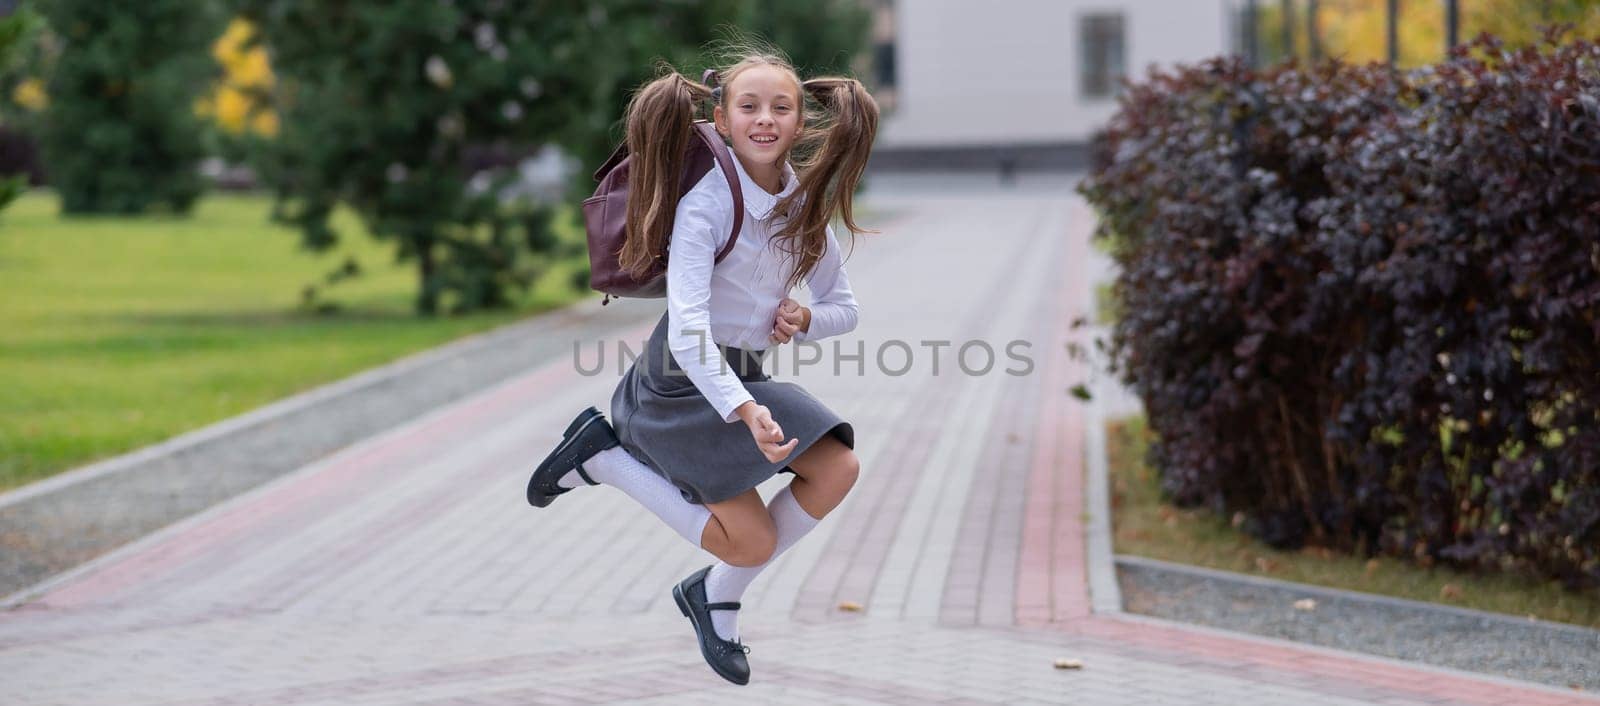 Happy caucasian girl in uniform and with a backpack jumping outdoors after school